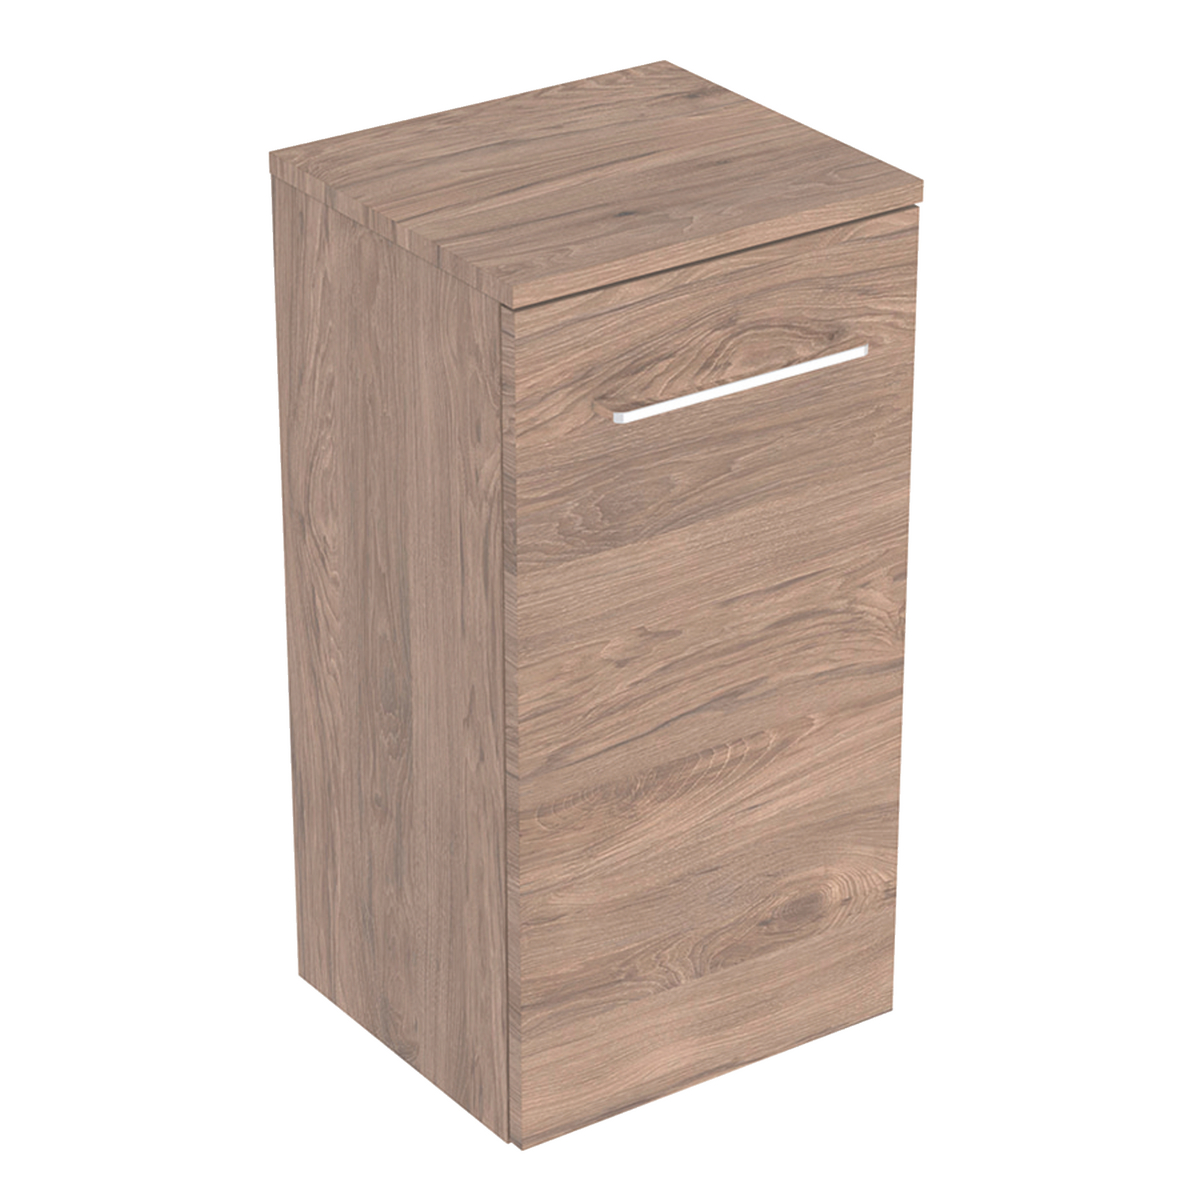 Selnova Square low cabinet H-650mm - Hickory 